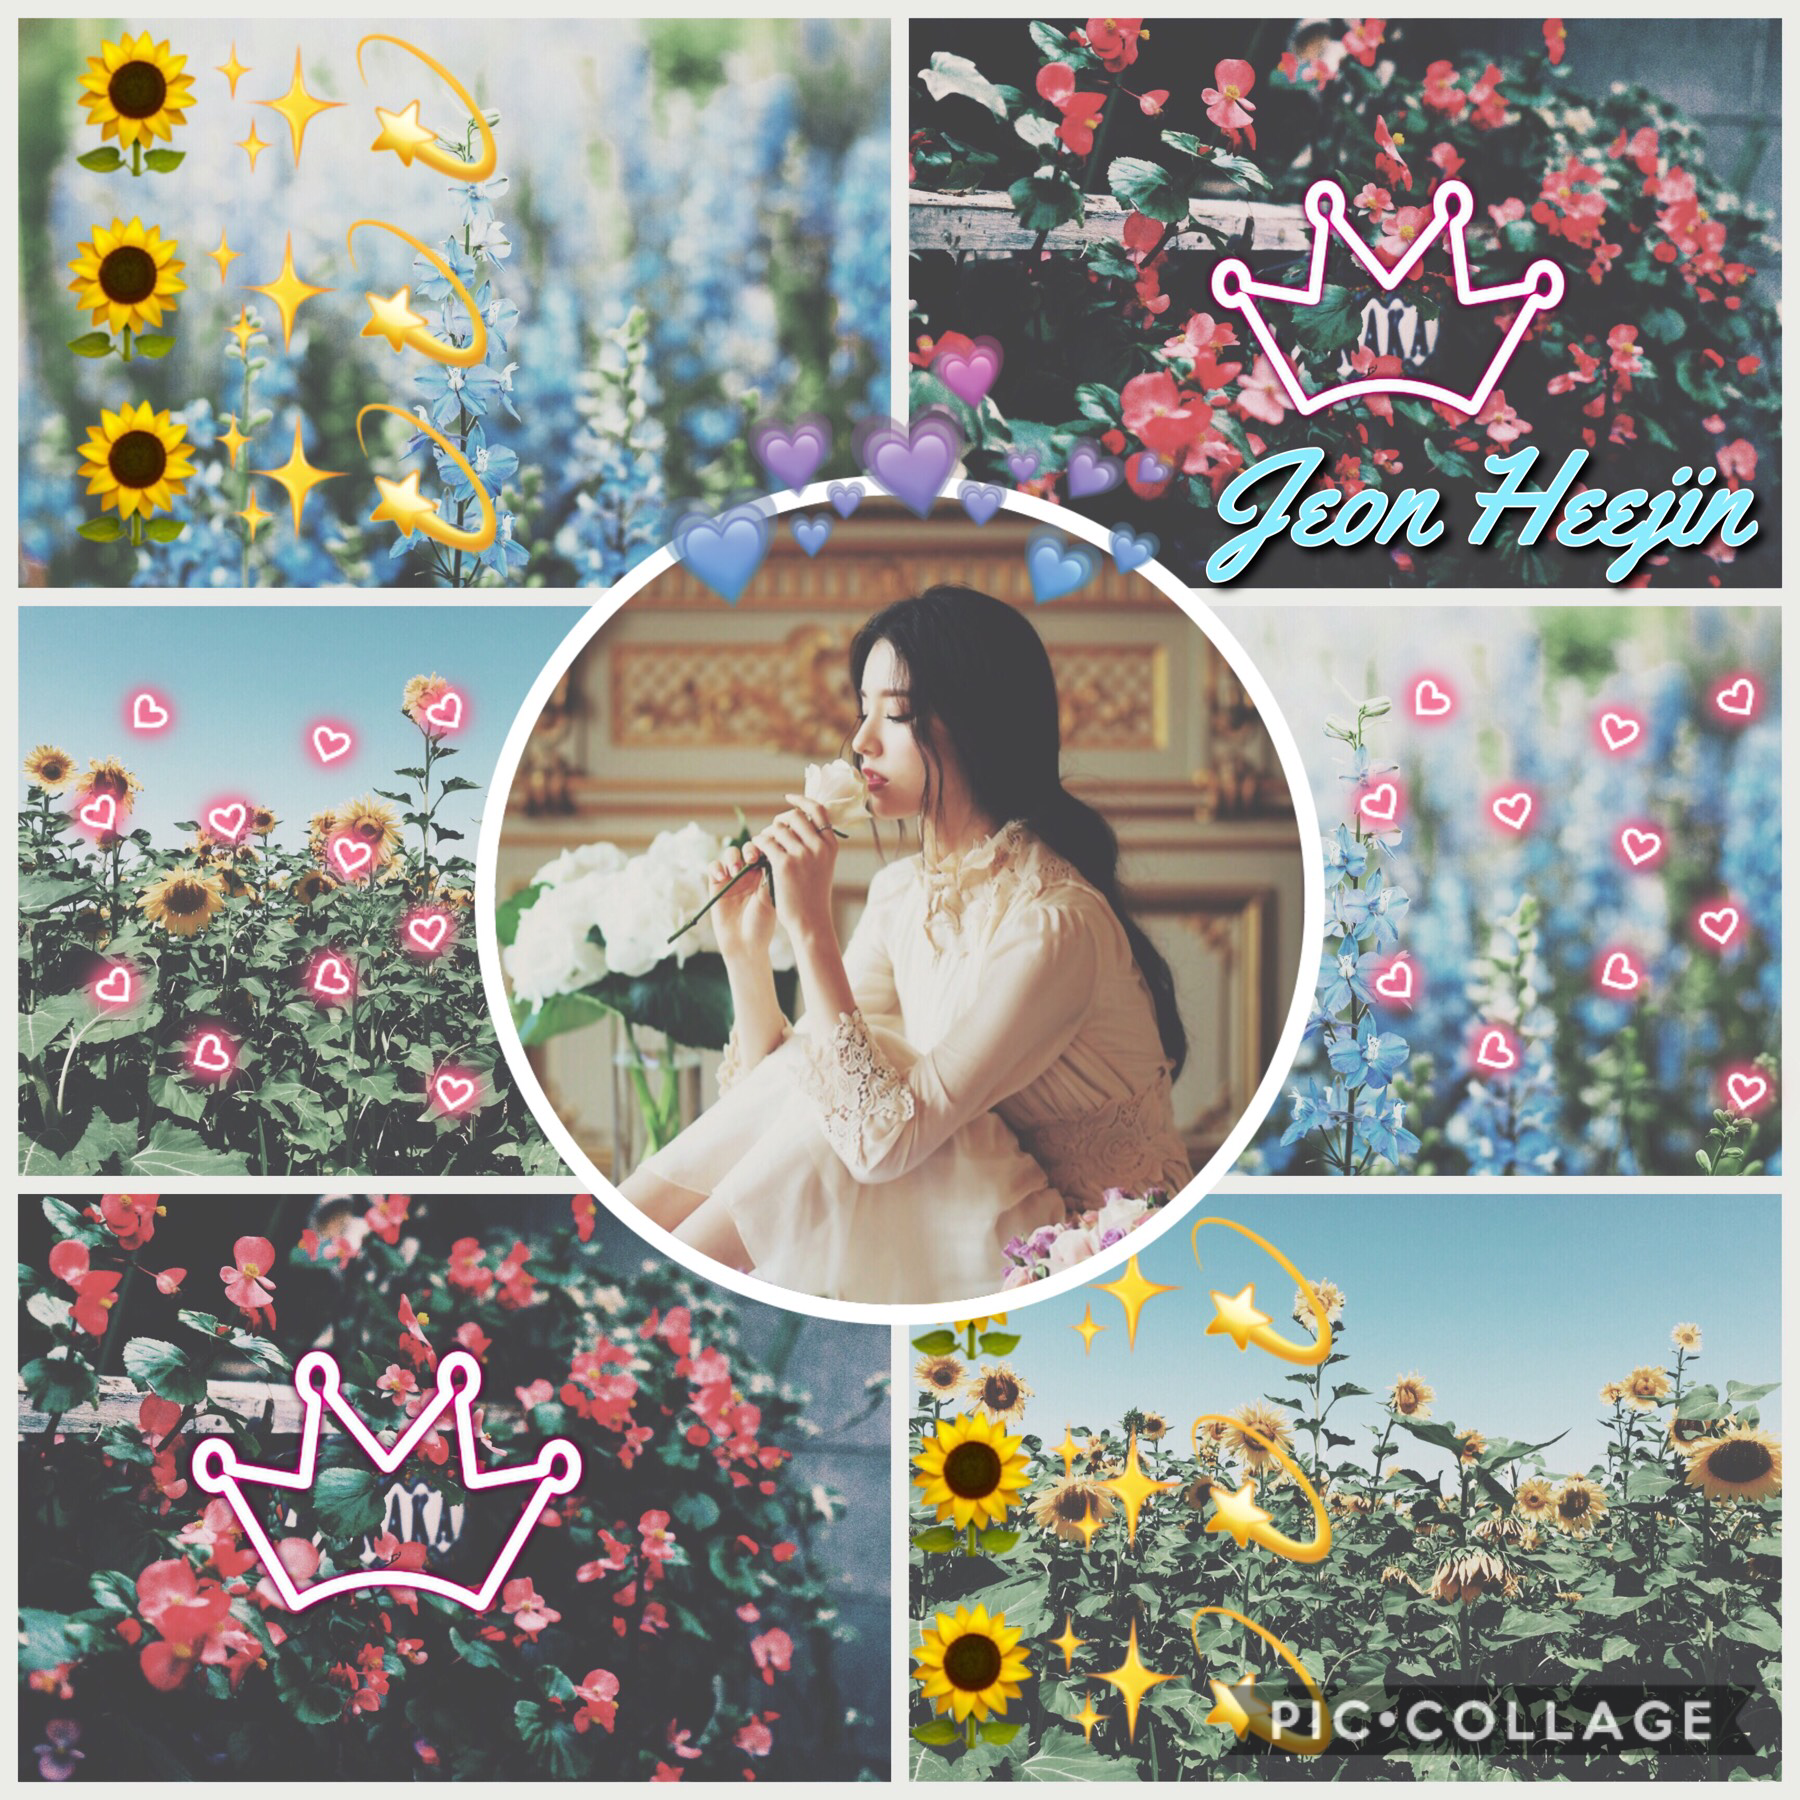 •🚒•
🌷Heejin~ Loona🌷
Edit for @Jonginfinite! This was the last request! 
Heejin is a queen and I love her so much haha💓💓she’s so talented and pretty~~